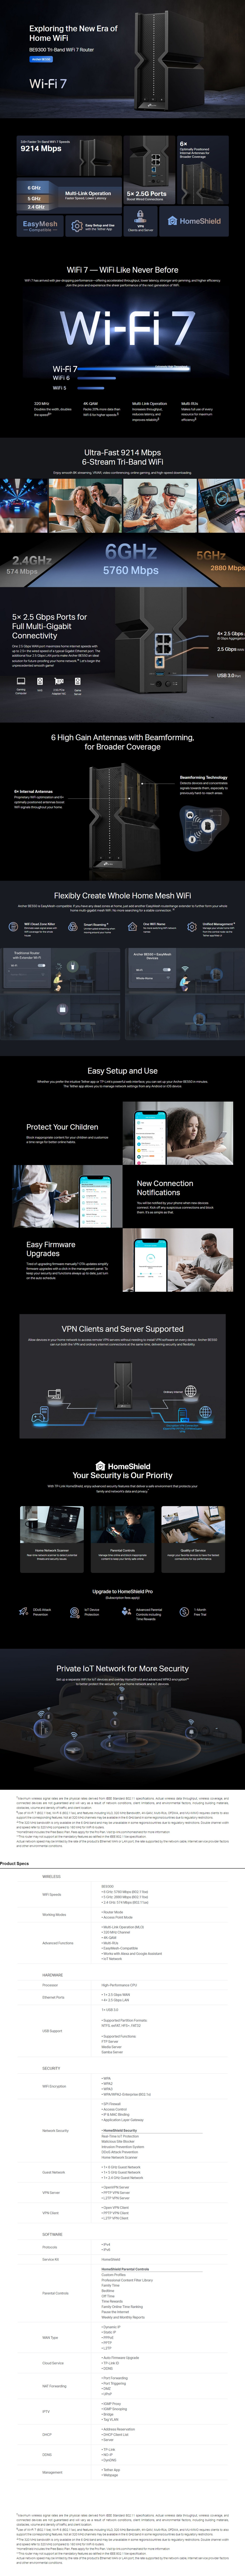 A large marketing image providing additional information about the product TP-Link Archer BE550 - BE9300 Tri-Band Wi-Fi 7 Router - Additional alt info not provided